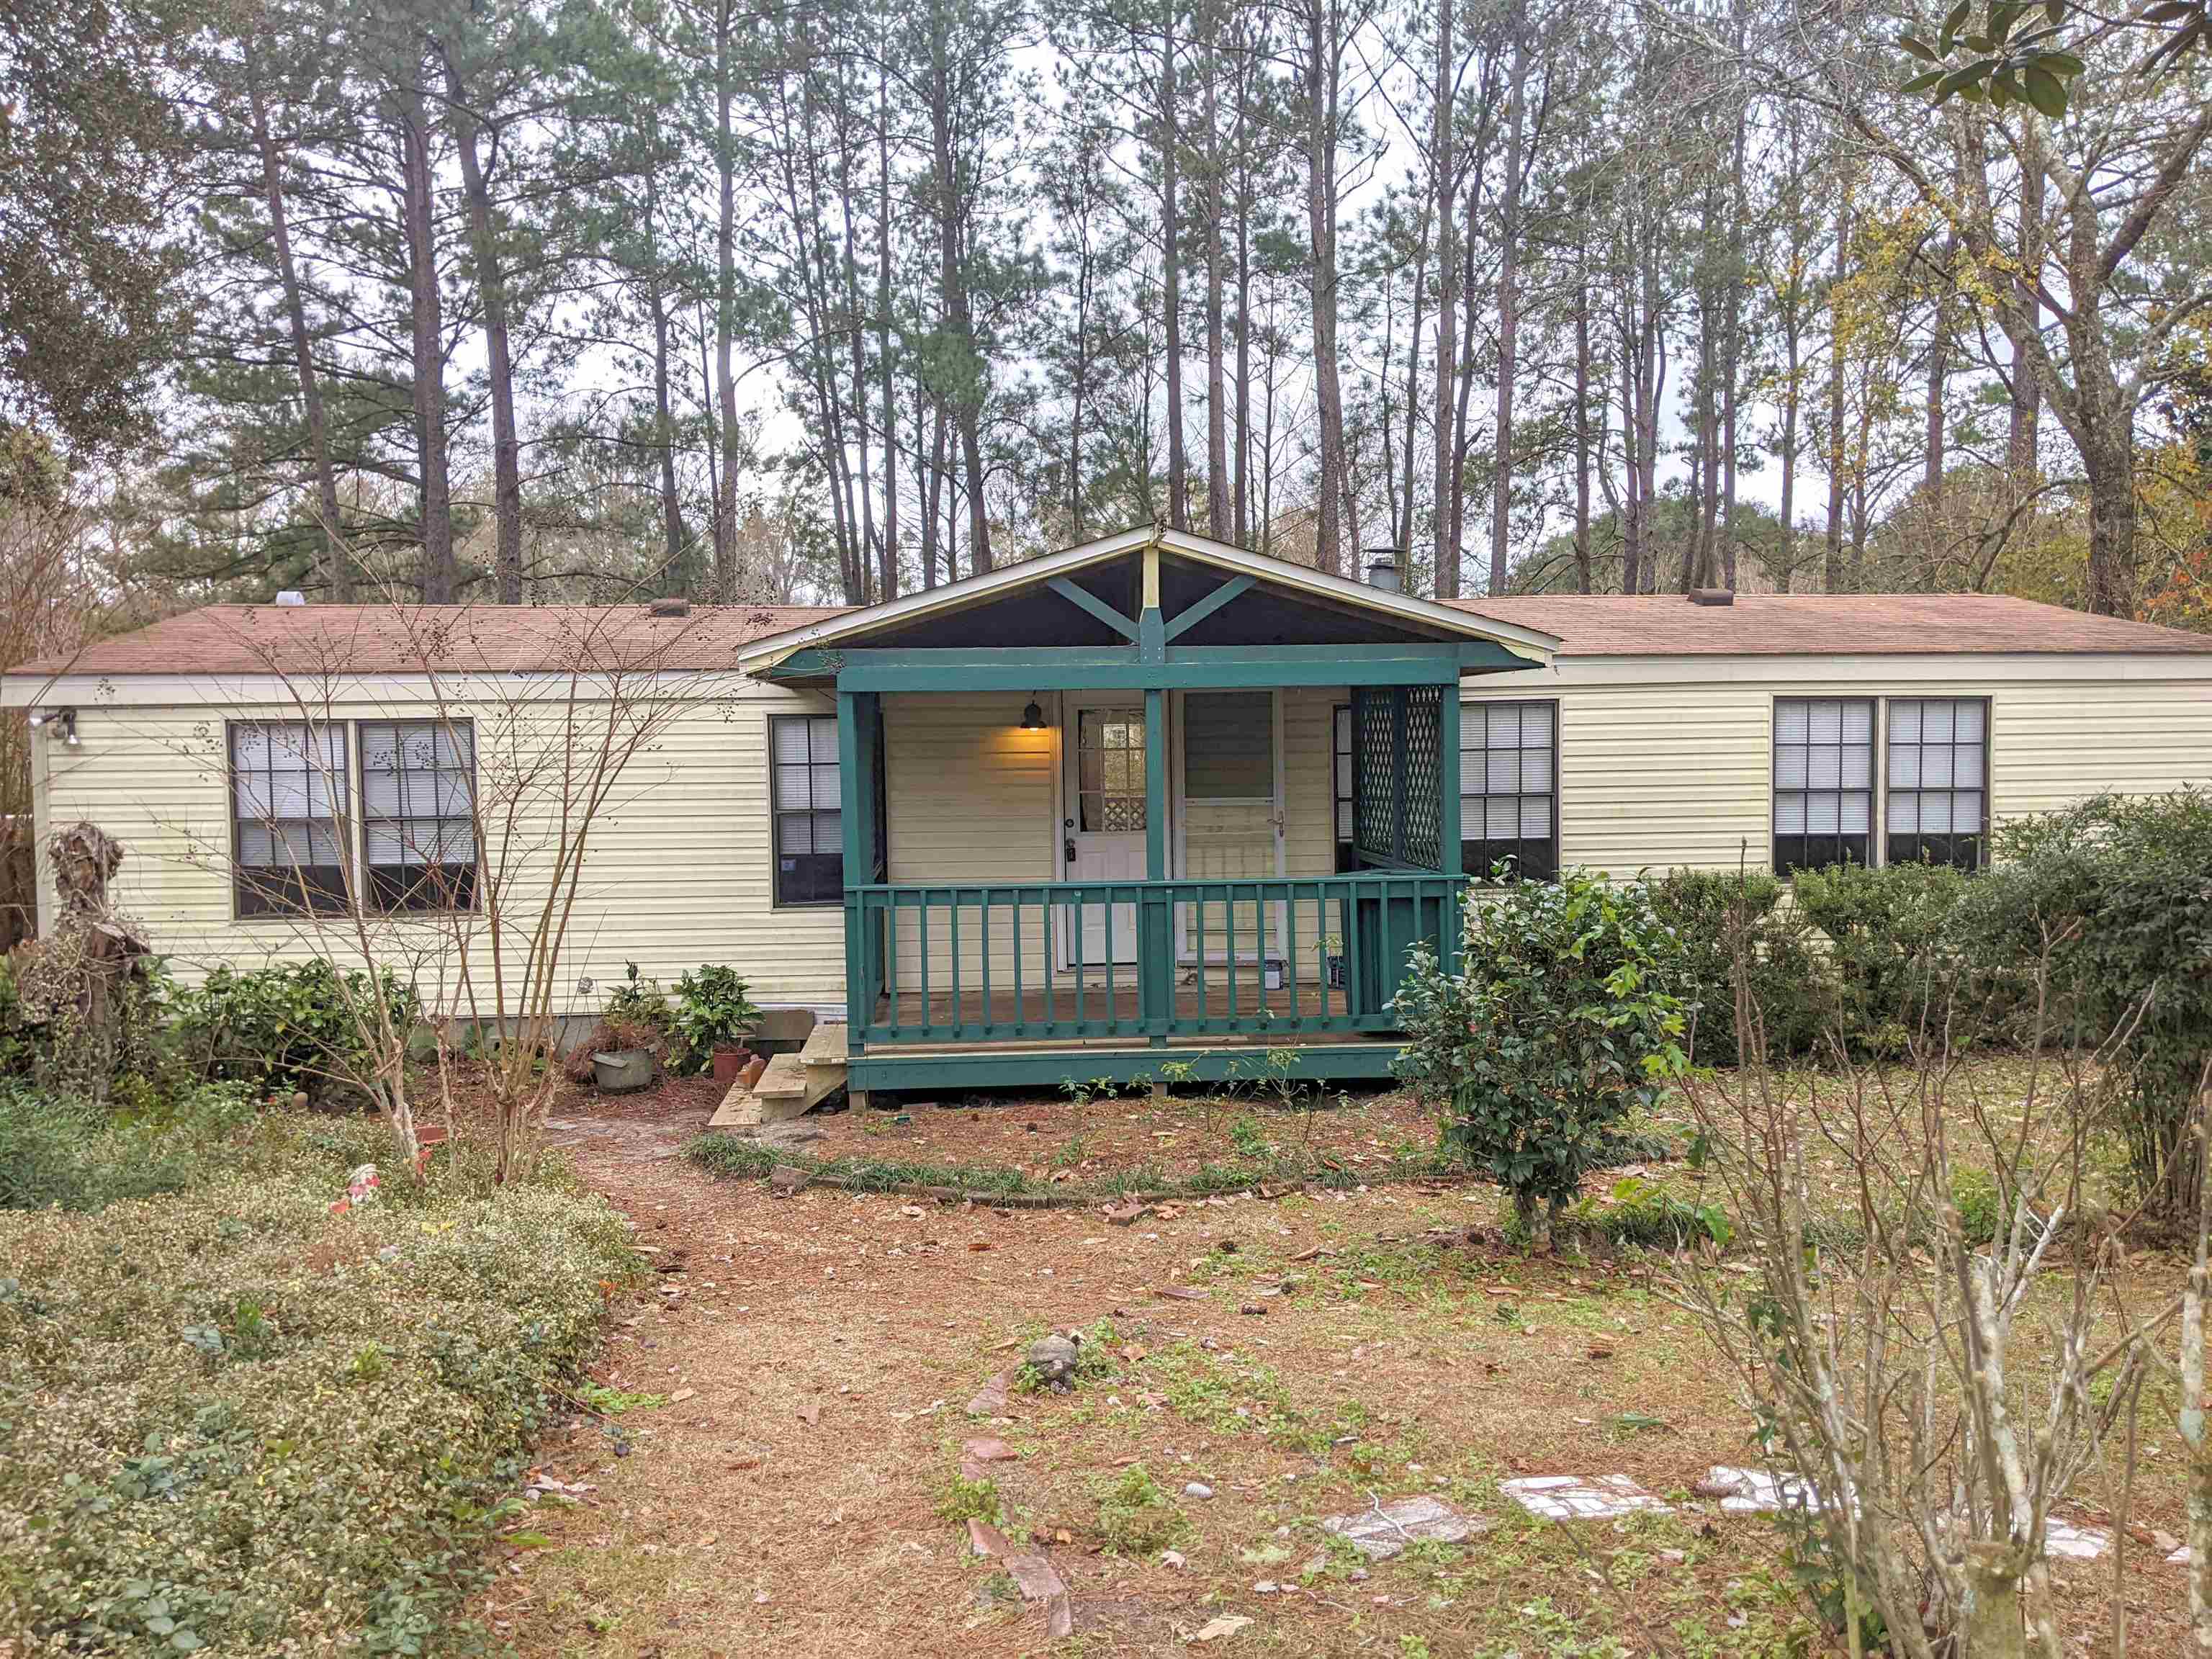 1117 Doves Hollow Lane,TALLAHASSEE,Florida 32304,3 Bedrooms Bedrooms,2 BathroomsBathrooms,Manuf/mobile home,1117 Doves Hollow Lane,367443